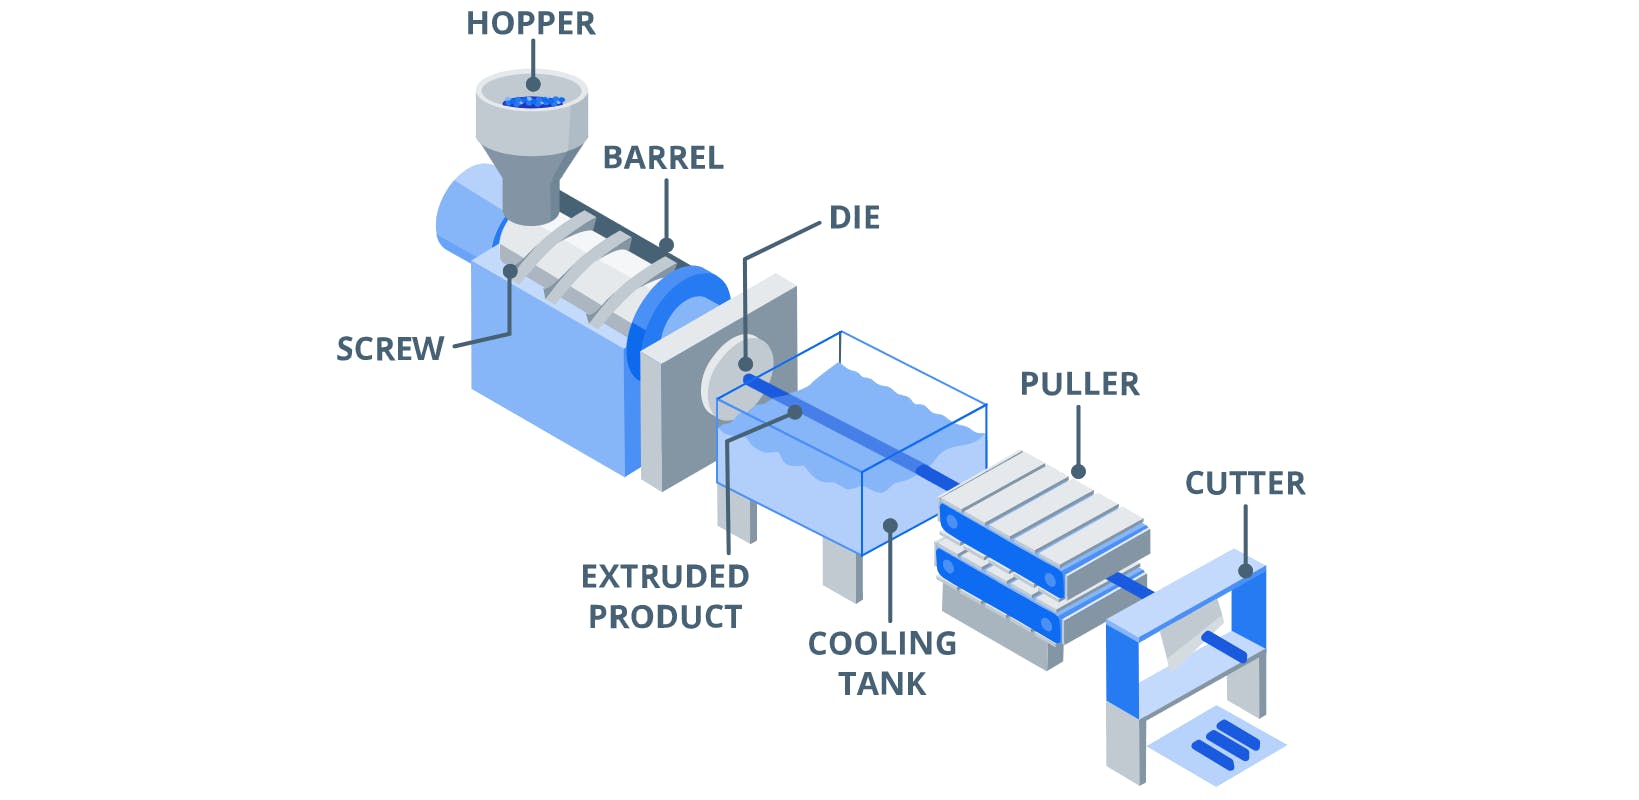 Illustration of the plastic extrusion process melting and extrusion stage.